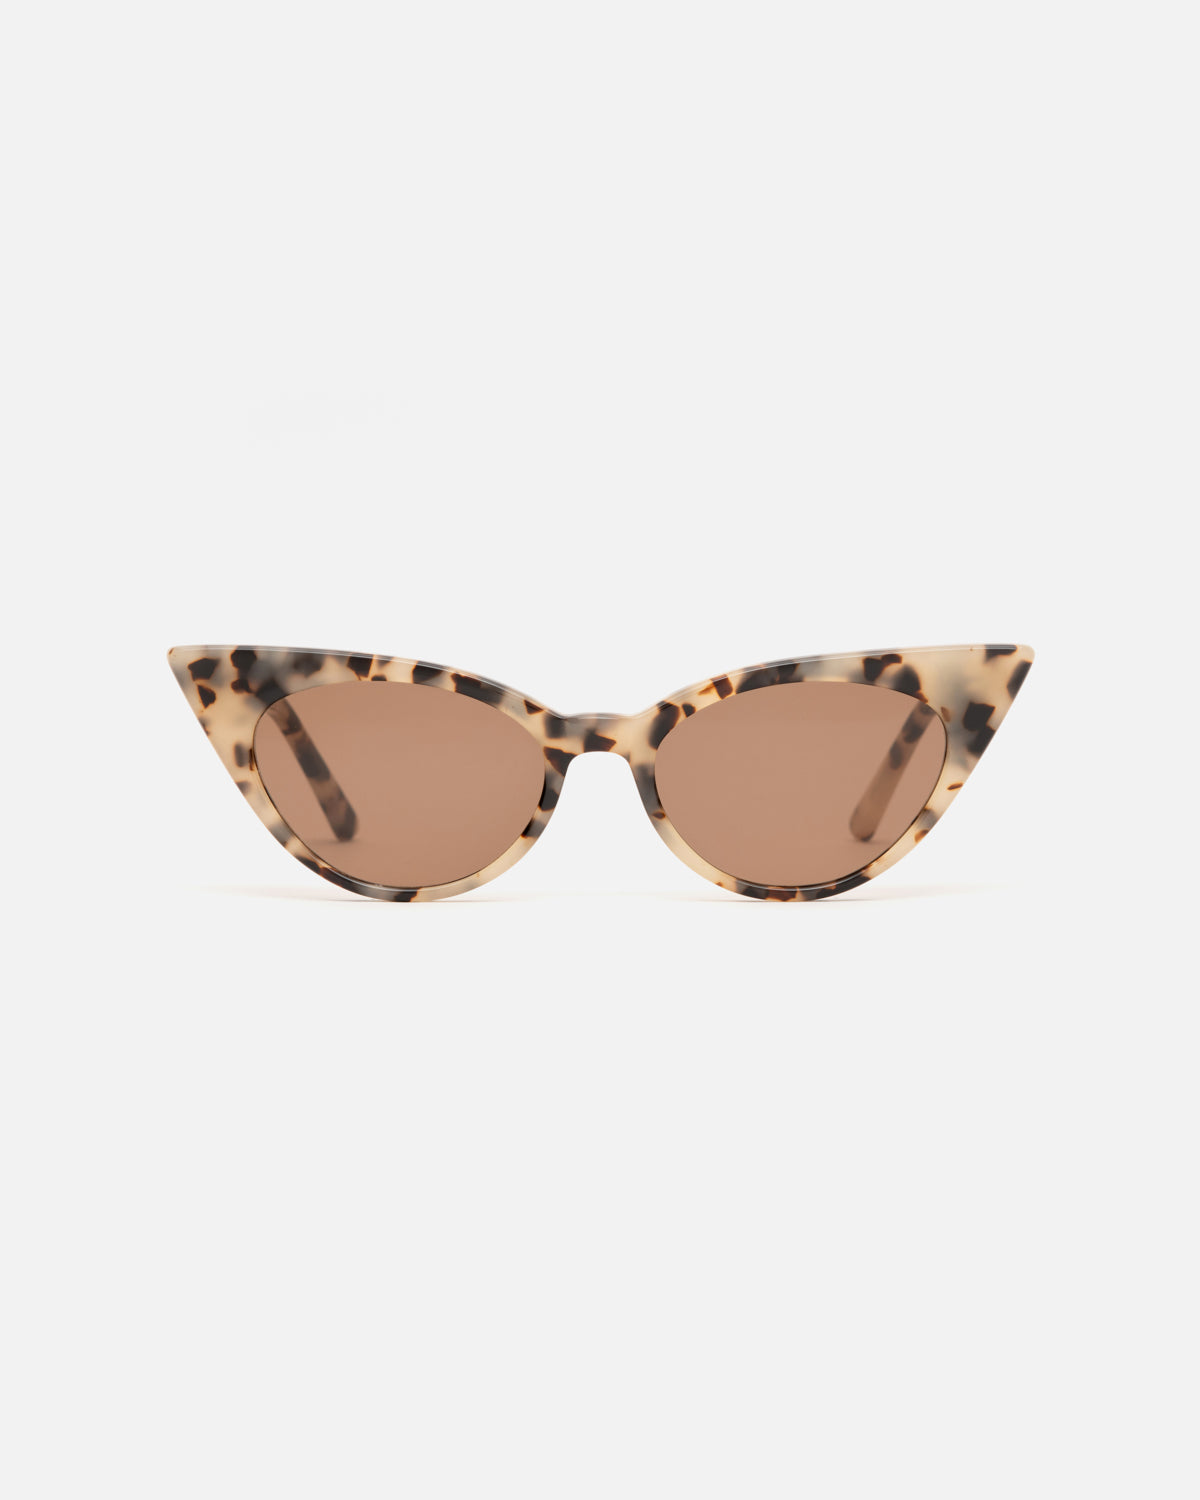 Lu Goldie Brigitte cat eye Sunglasses in choc tortoise shell acetate with brown lenses, front